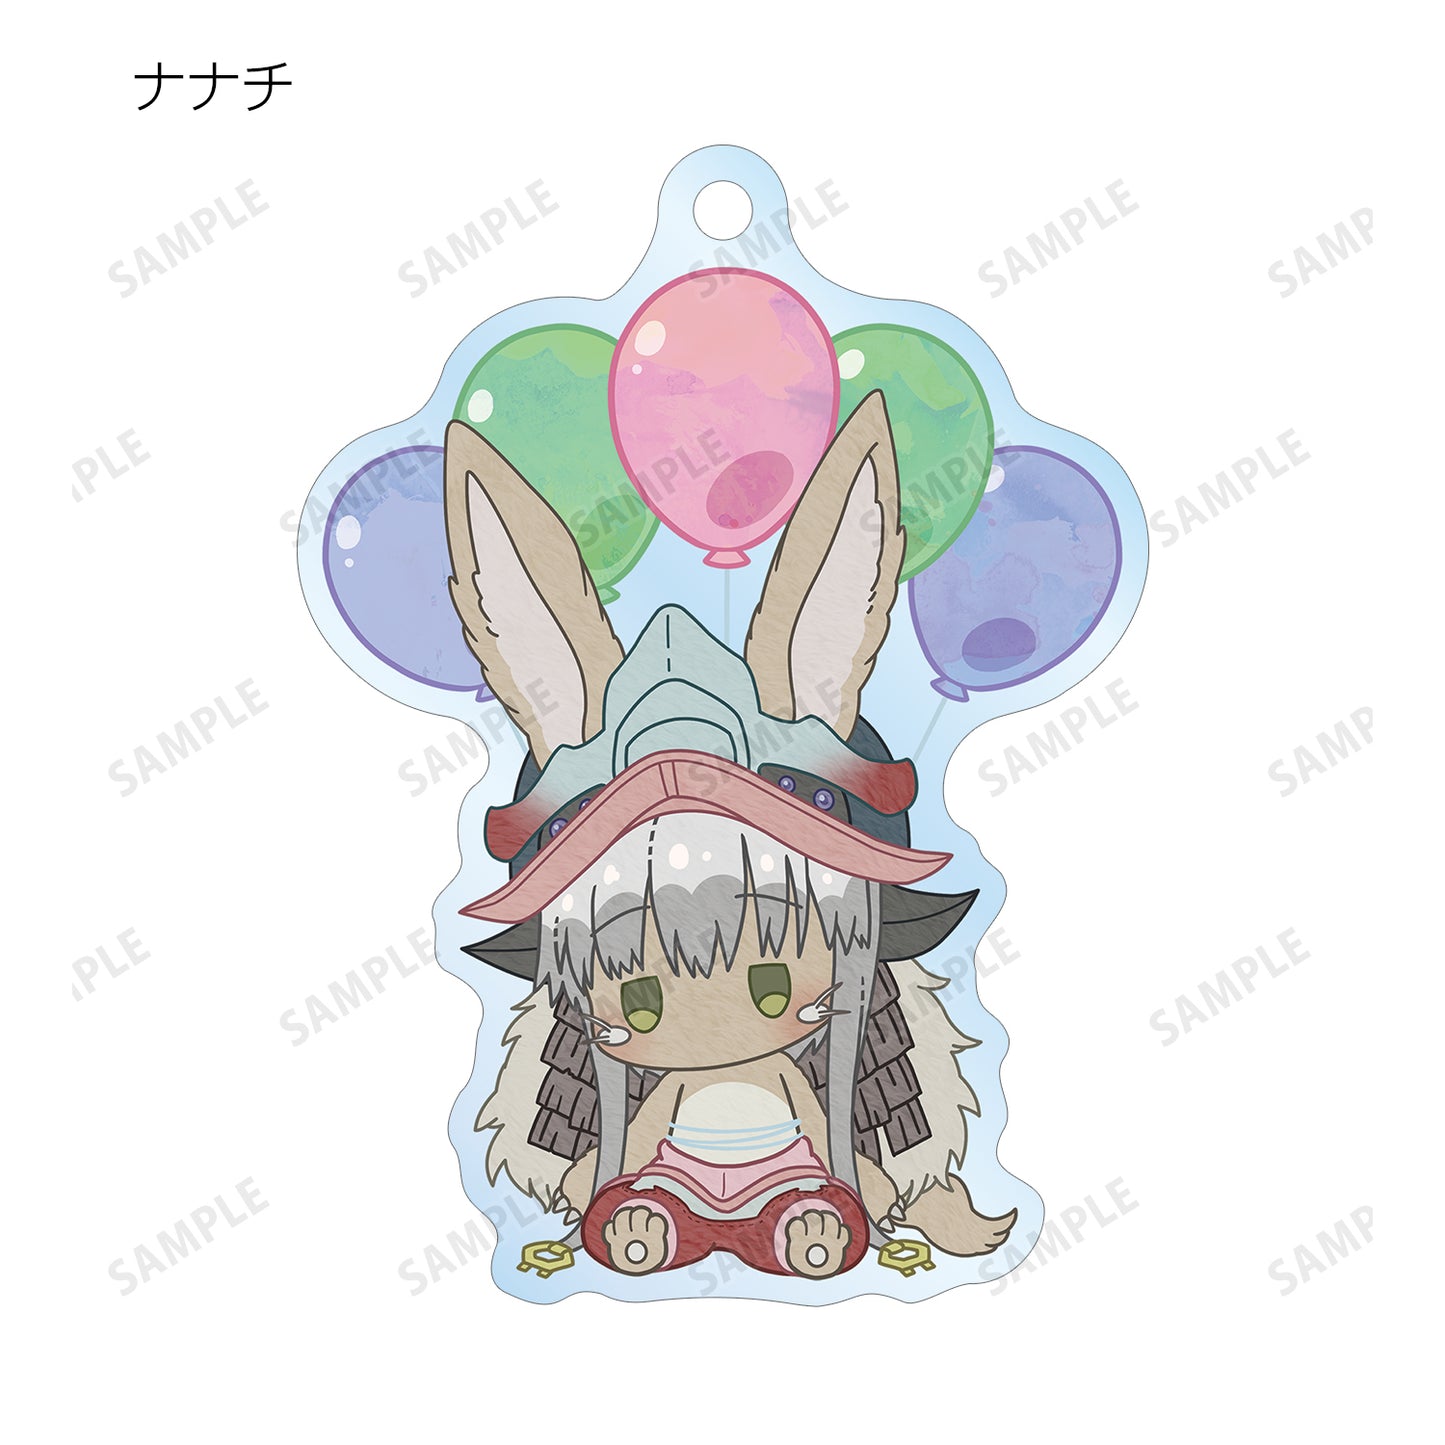 Made in Abyss: The Golden City of the Scorching Sun" Trading Popoon Acrylic Key Chain